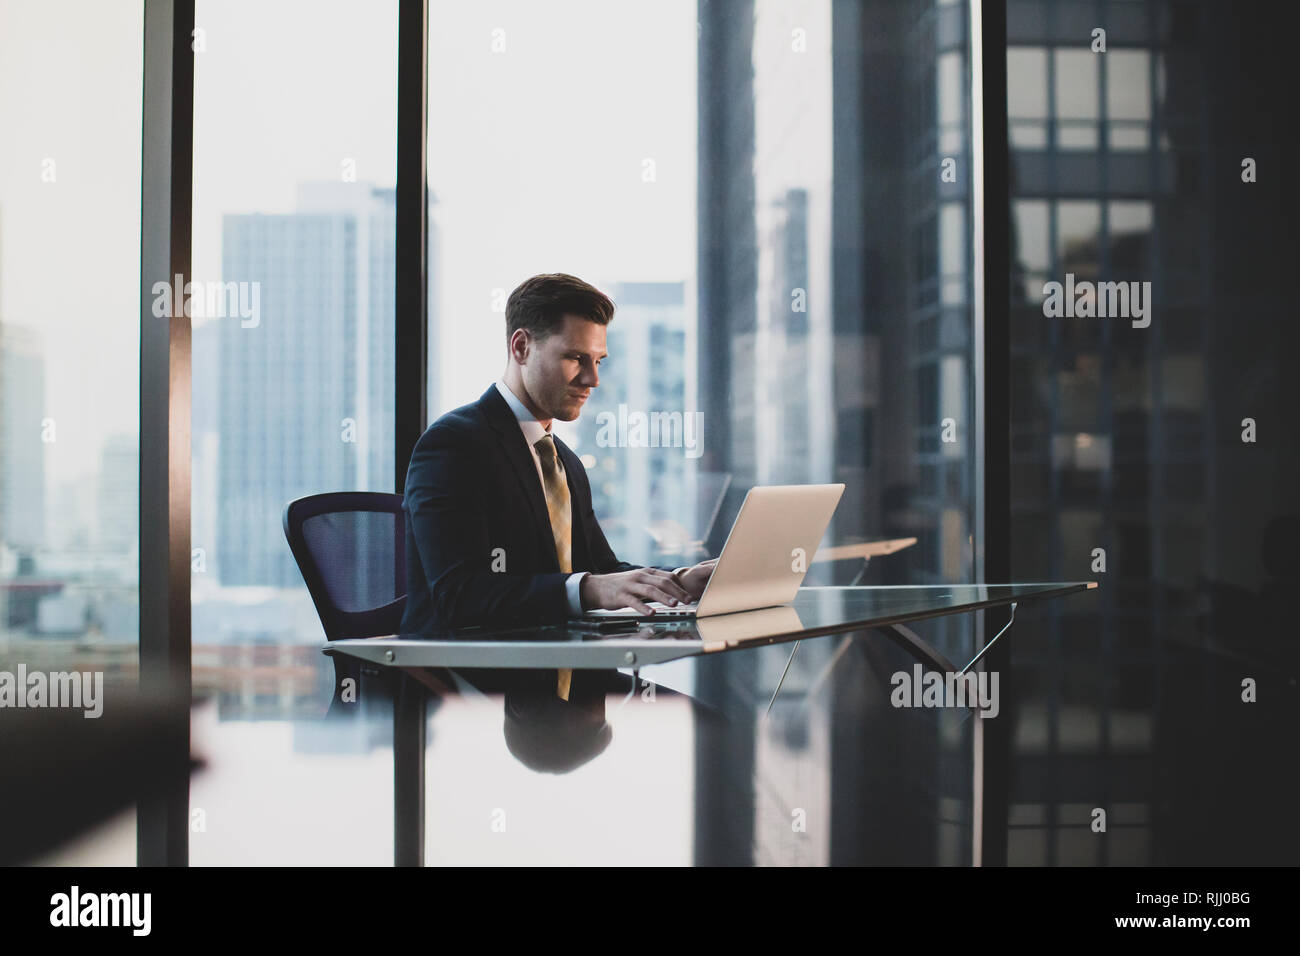 Businessman working in executive office in a skyscraper Stock Photo